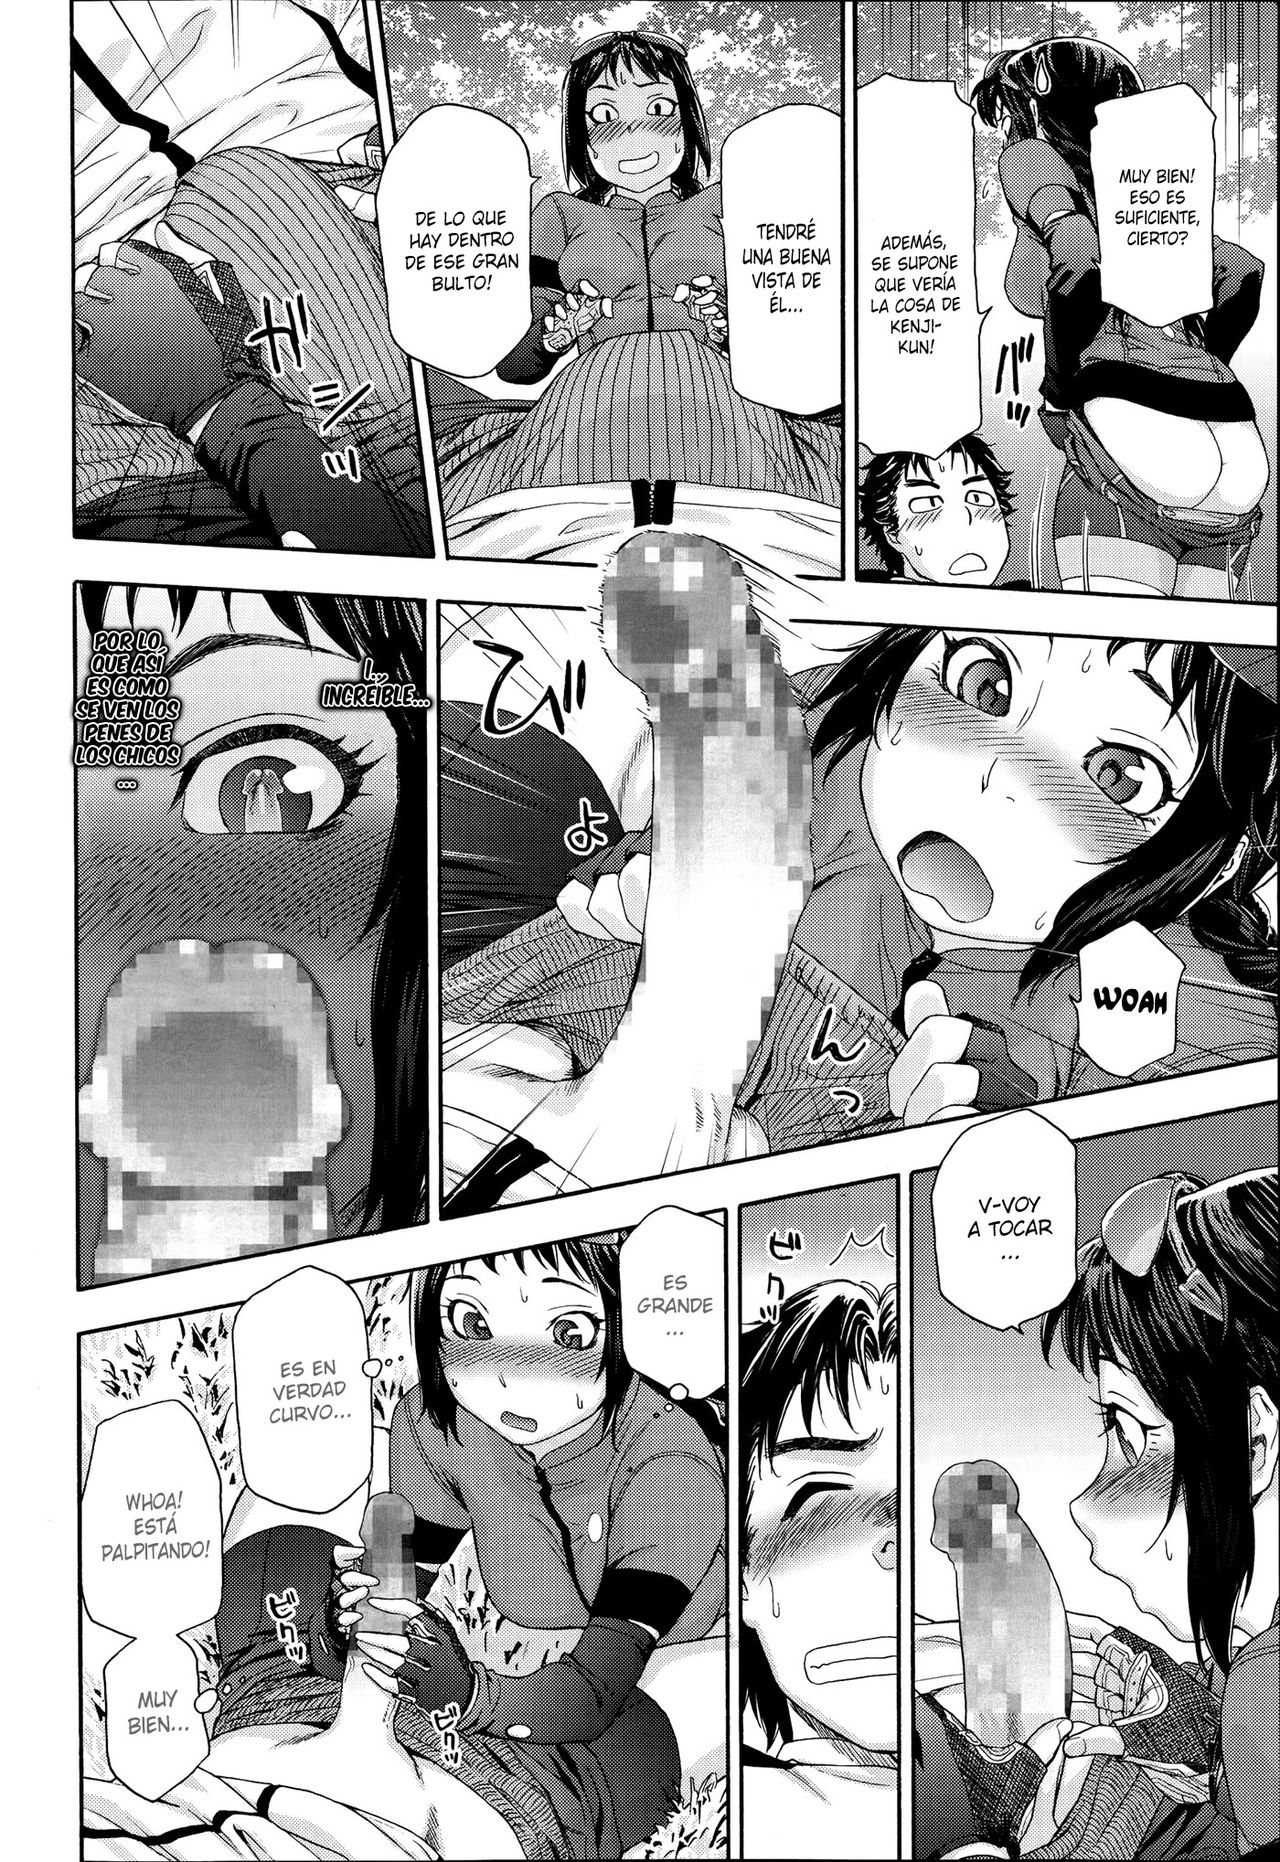 [Yamatogawa] Touch Me If You Can! | Tocame Si puedes! (COMIC Tenma 2014-09) [Spanish] [XHentai95] [大和川] タッチ・ミー・イフ・ユー・キャン！ (COMIC 天魔 2014年9月号) [スペイン翻訳]